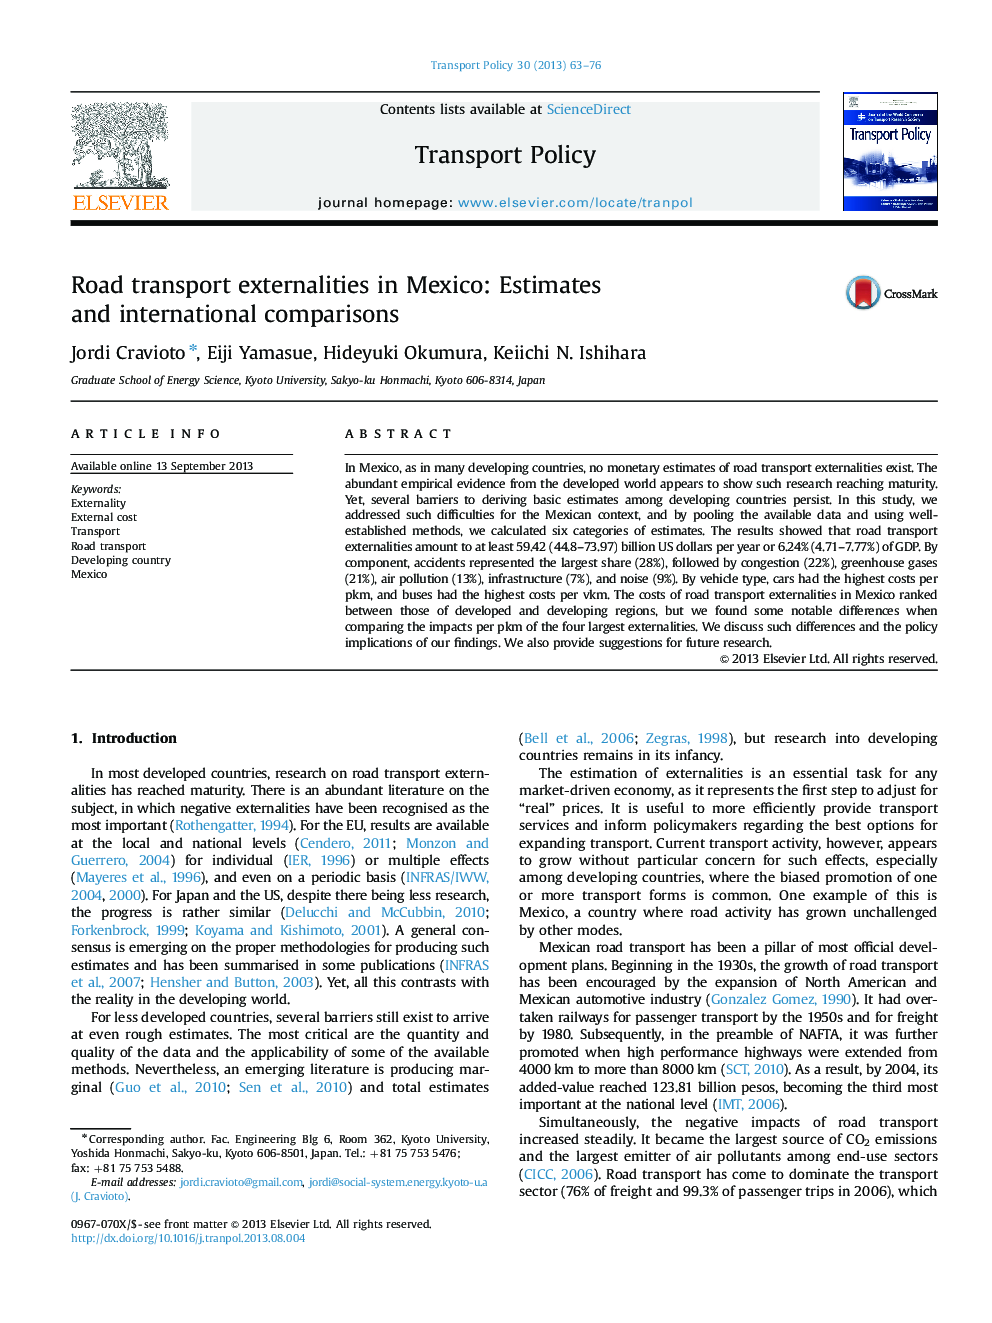 Road transport externalities in Mexico: Estimates and international comparisons